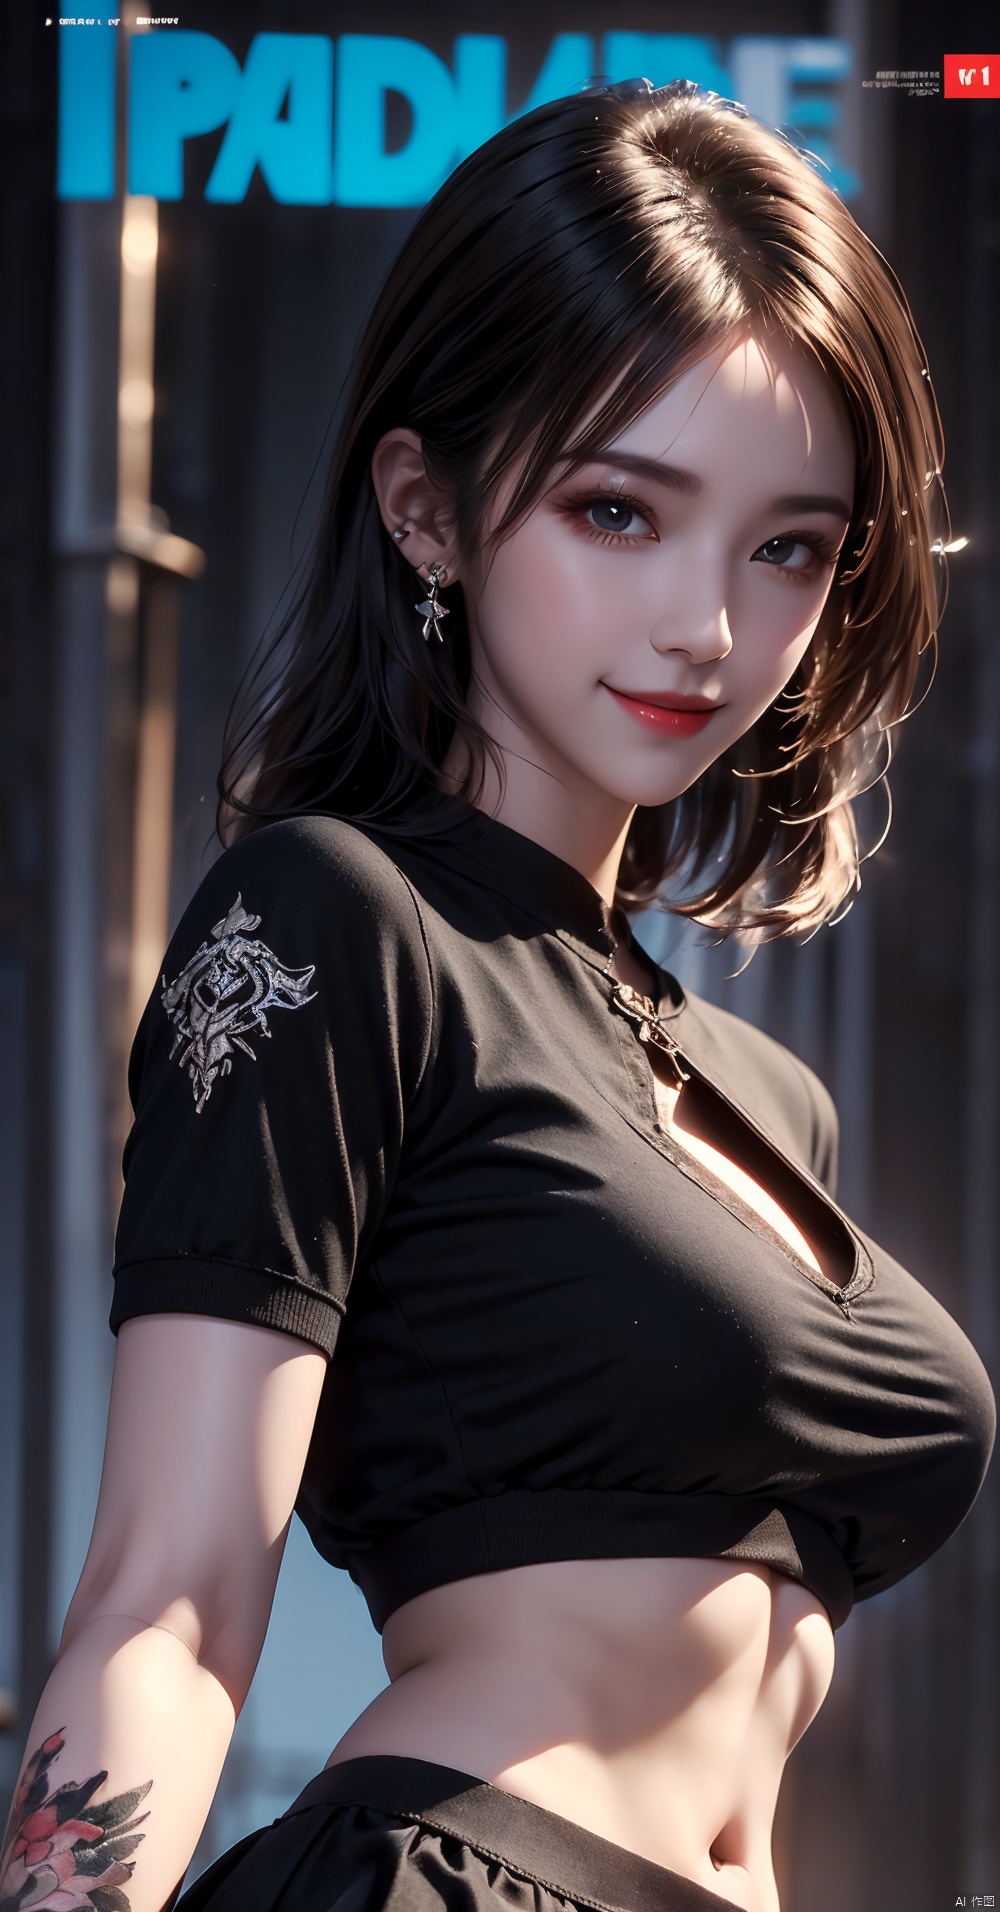  (Good structure), DSLR Quality,Depth of field ,looking_at_viewer,Dynamic pose, , kind smile,
magazine, (cover-style:1.1), fashionable, 1girl,Black armor,Visual impact,A shot with tension,(upper body:1.0),cold attitude, Ear stud,tattoo,
, xiaowu